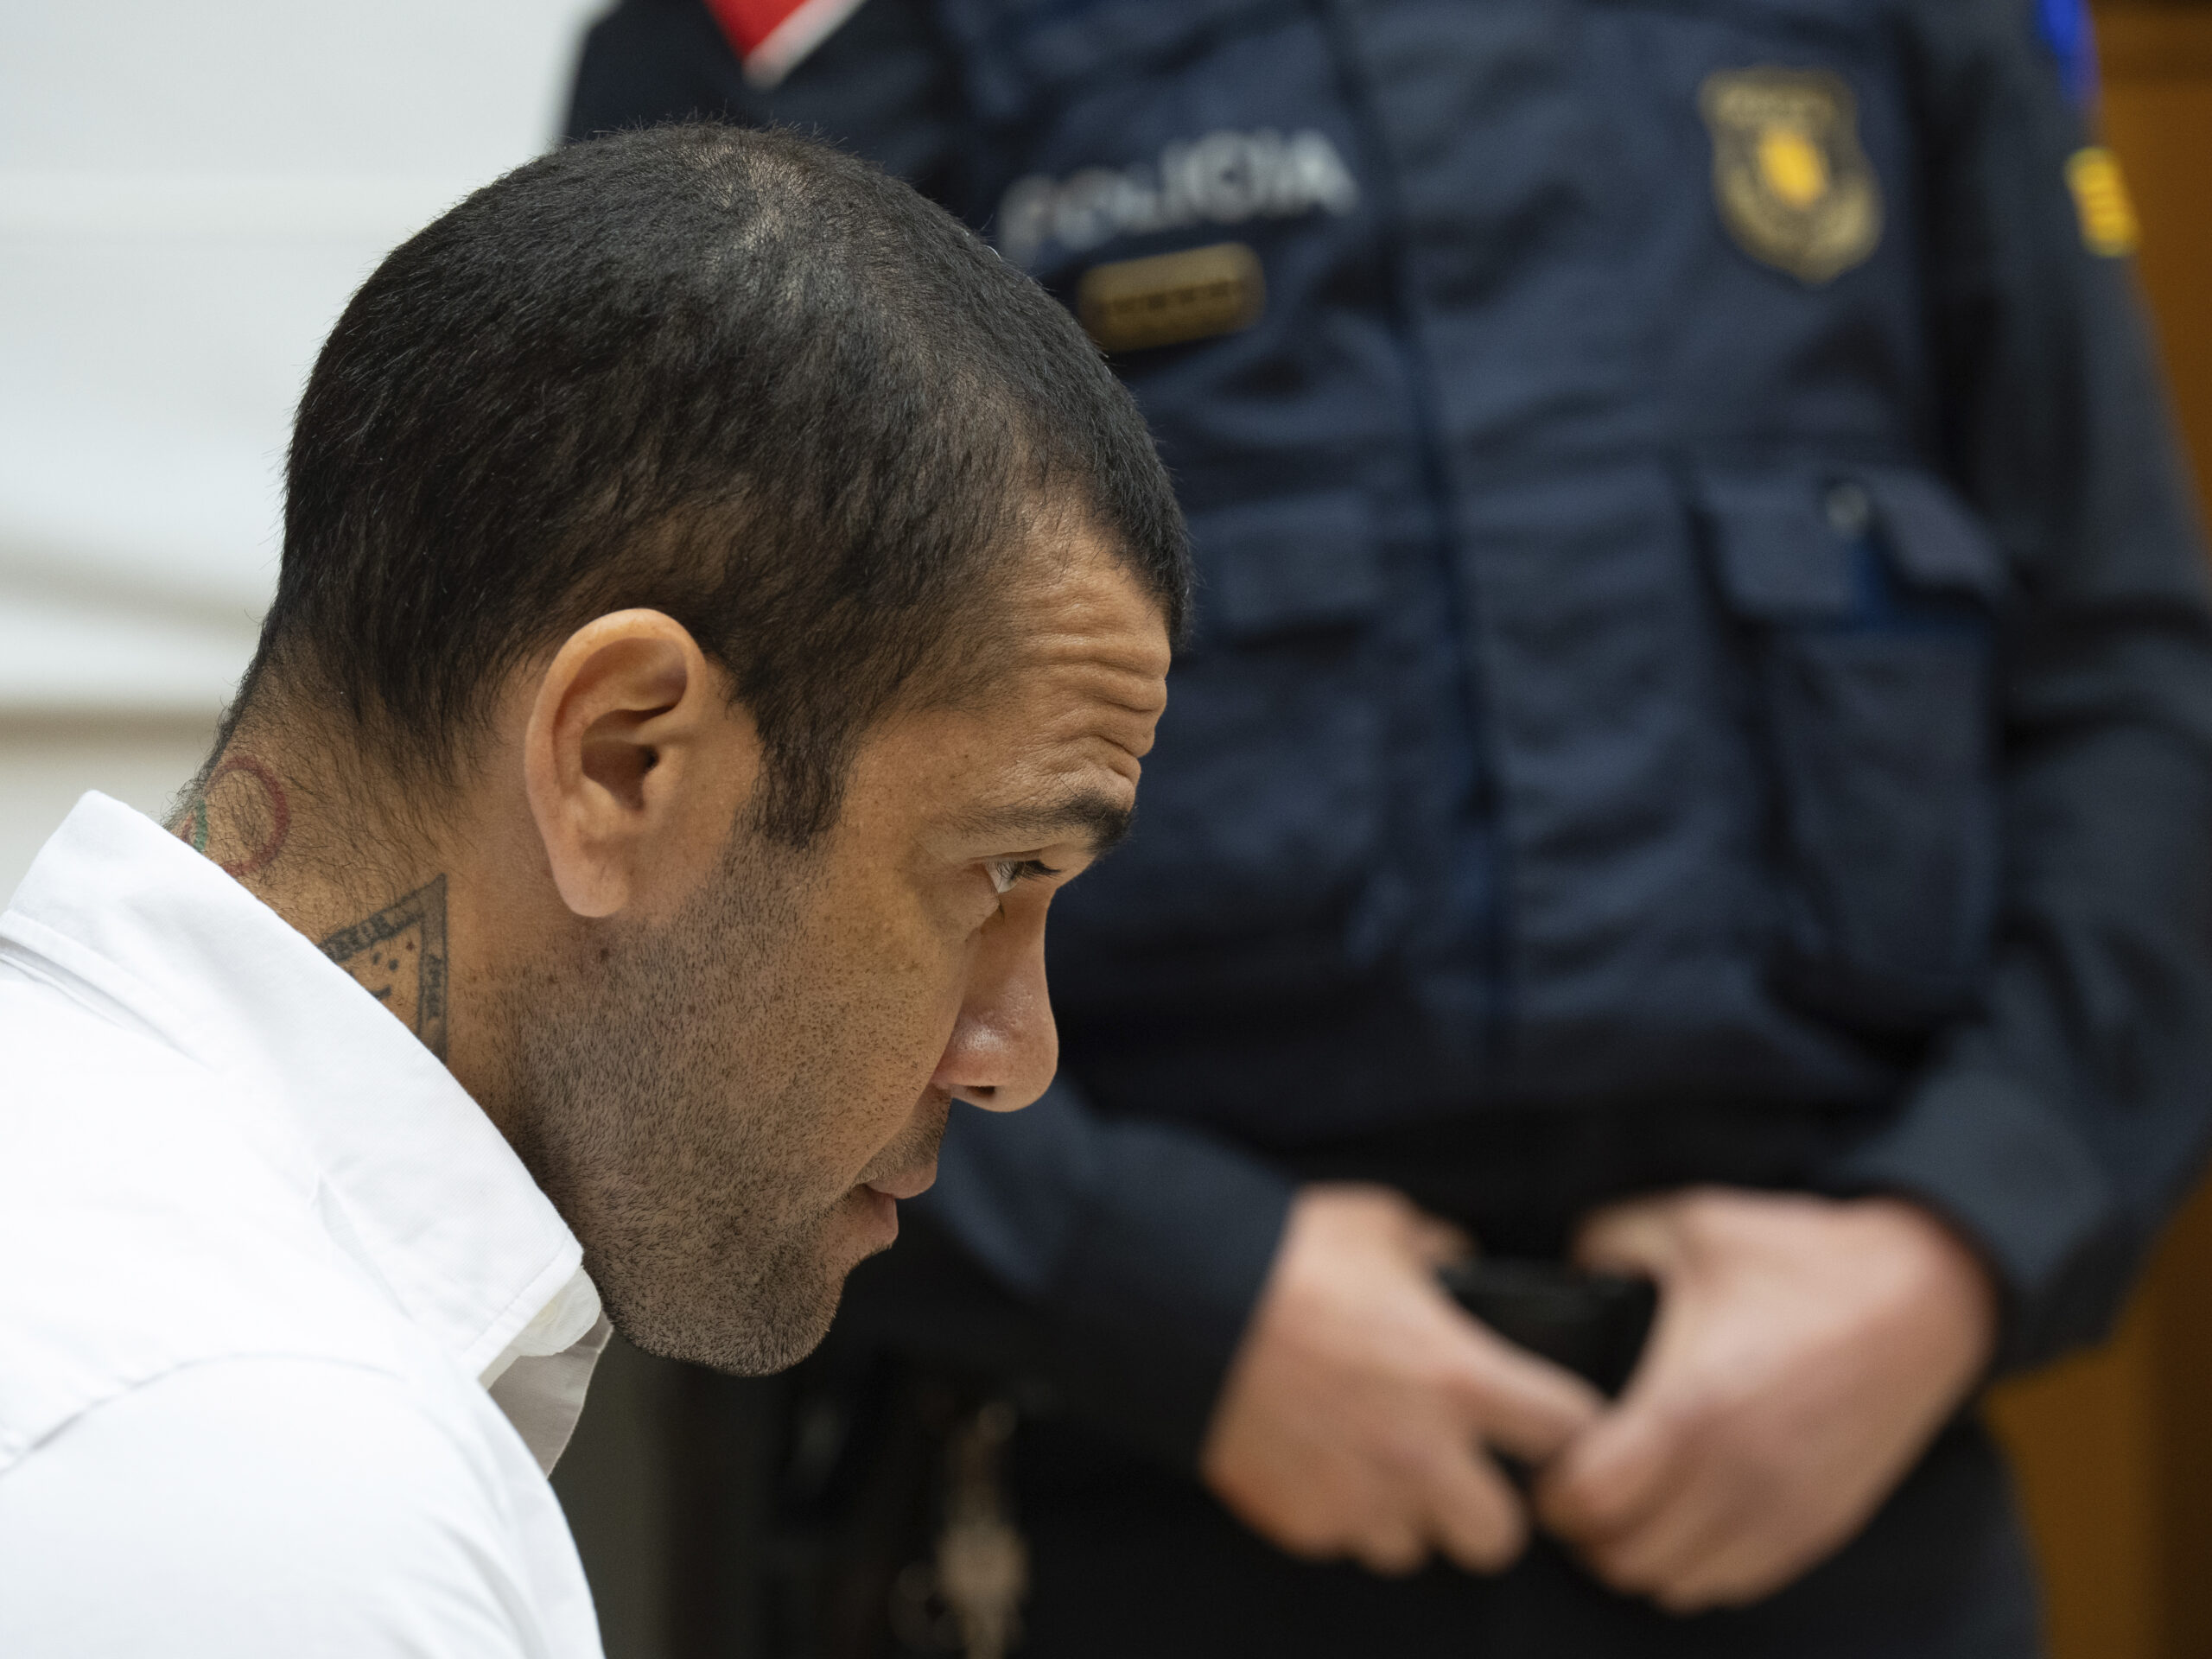 Soccer star Dani Alves is found guilty of rape and sentenced to 4 1/2 years in prison